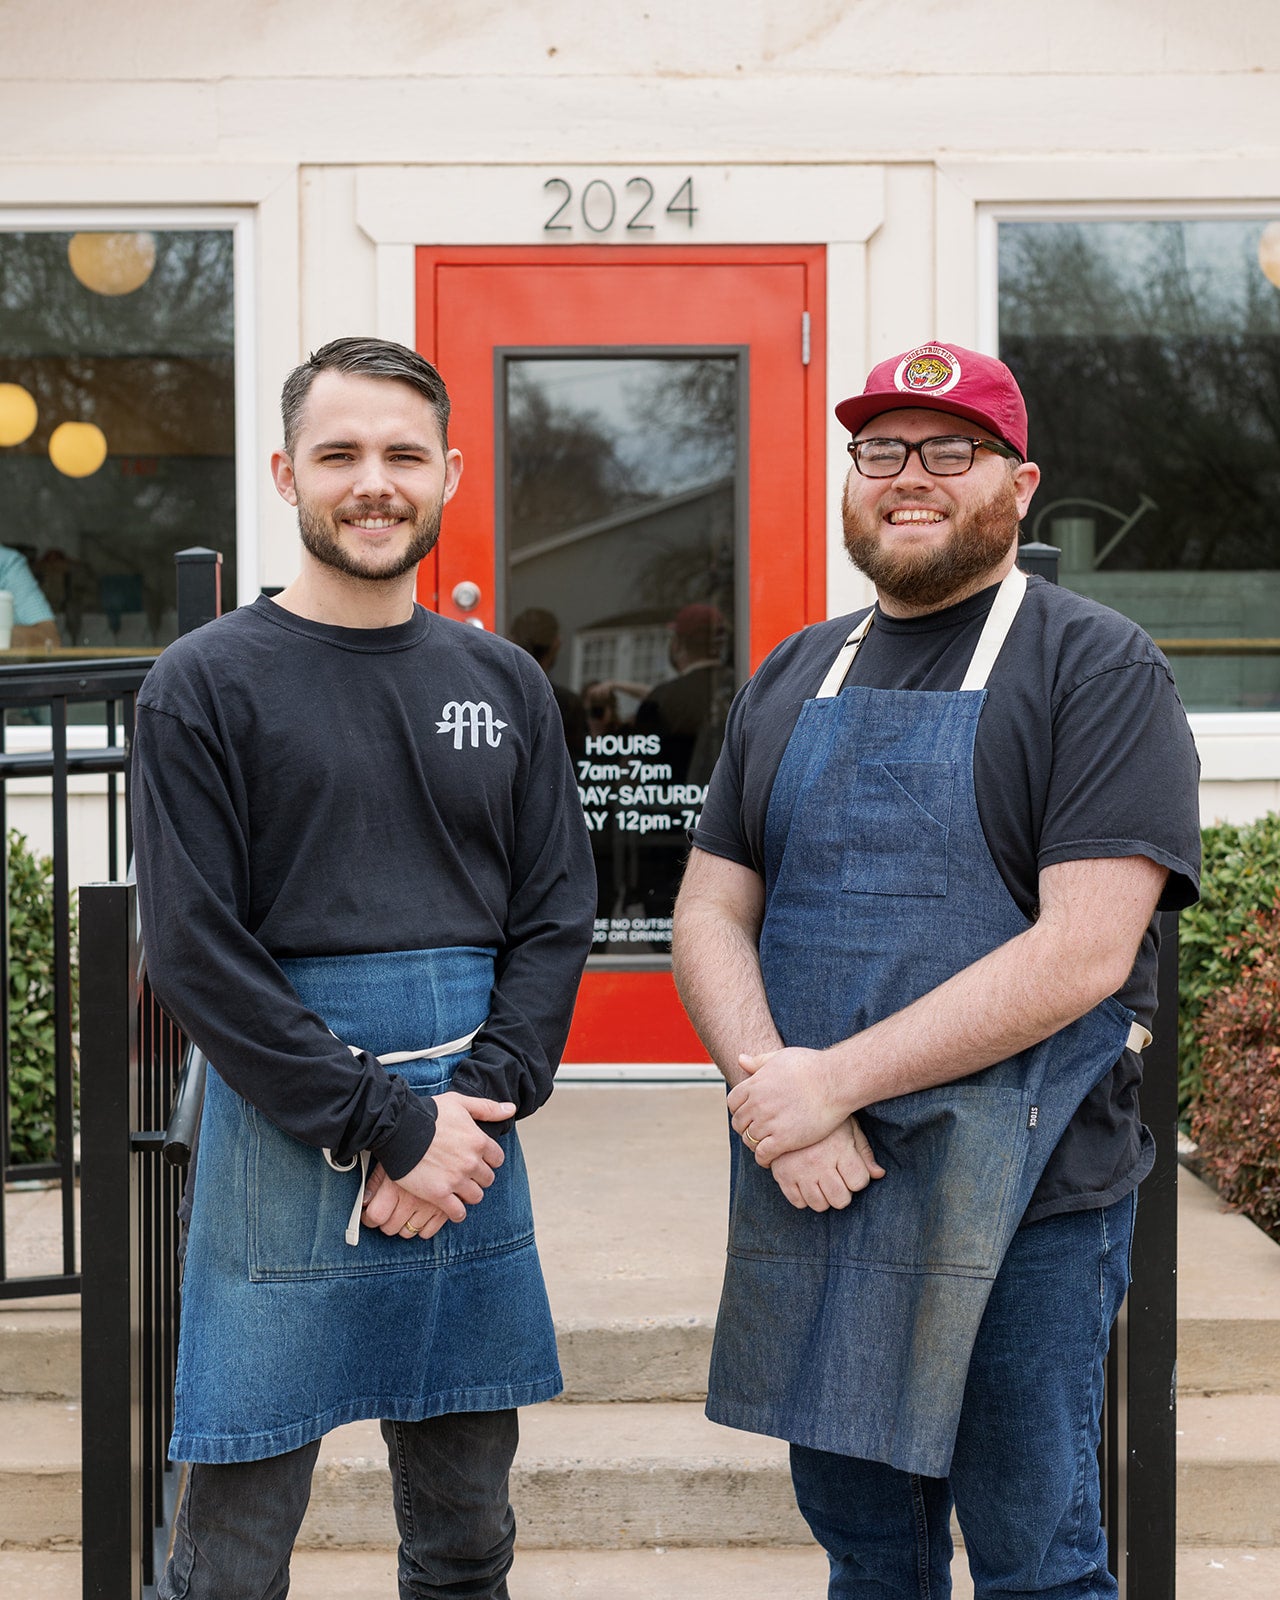 Brothers, Trenton and Randall Jackson own Monomyth Coffee in Lubbock, Texas. They locally roast coffee and serve people in their cafe. 